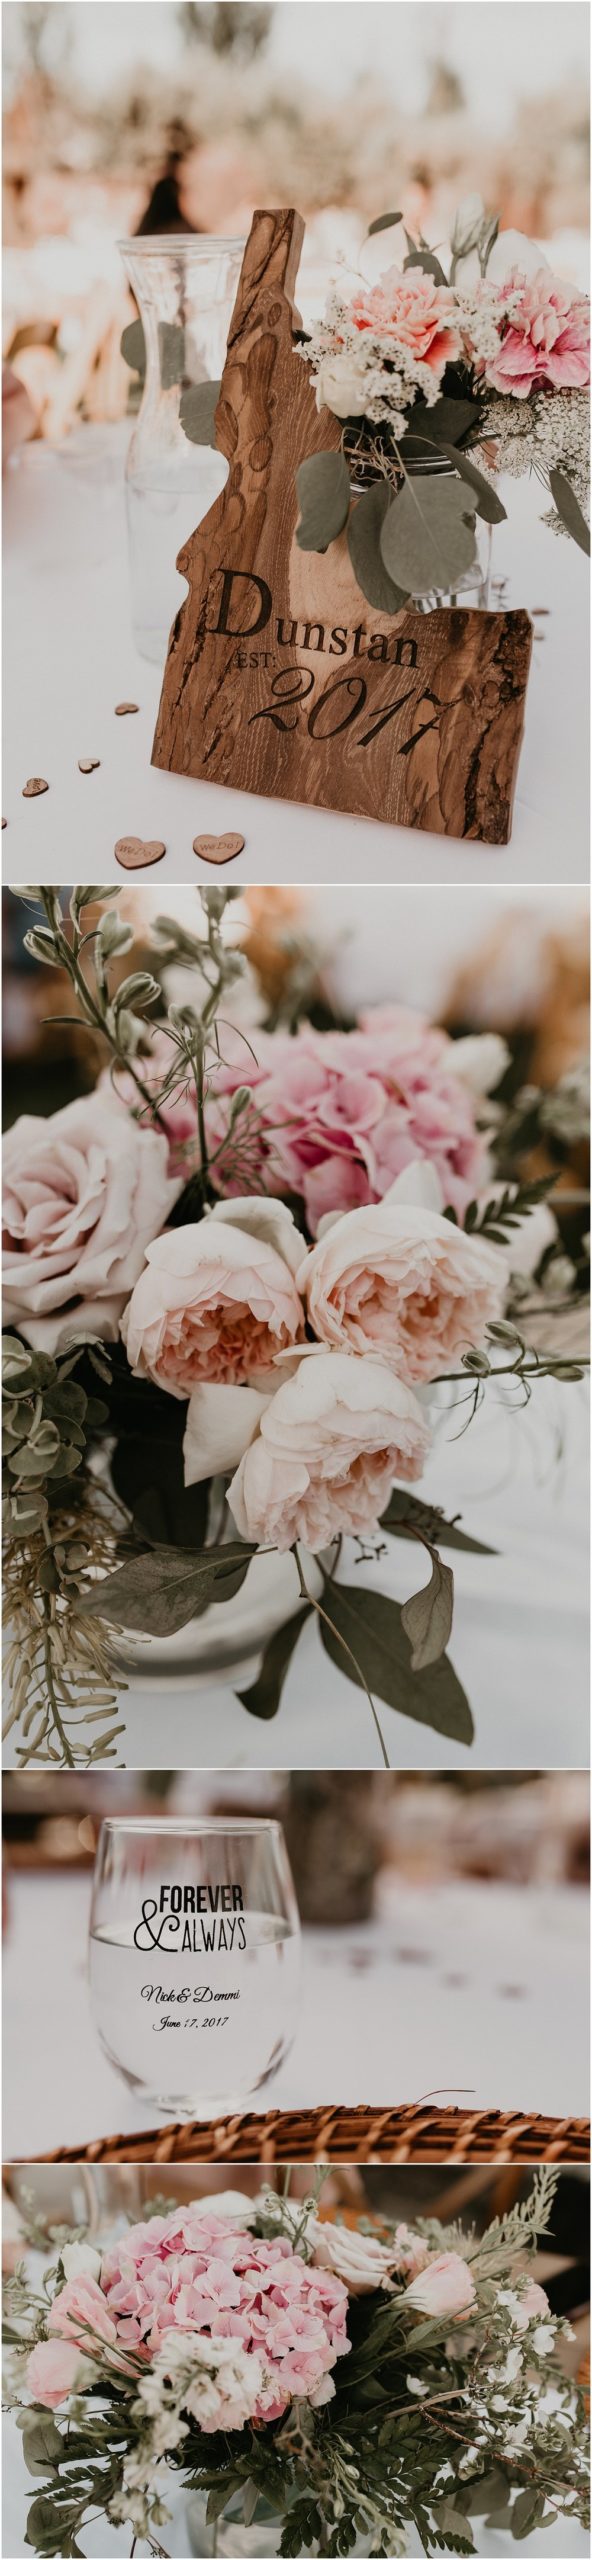 Boise Wedding Photographer Makayla Madden Photography Still Water Hollow Boise Wedding Venue Country Chic Rustic Ira Lucy Wedding Planning Events Design Idaho Wedding Ideas Decor Just So. Event Floral